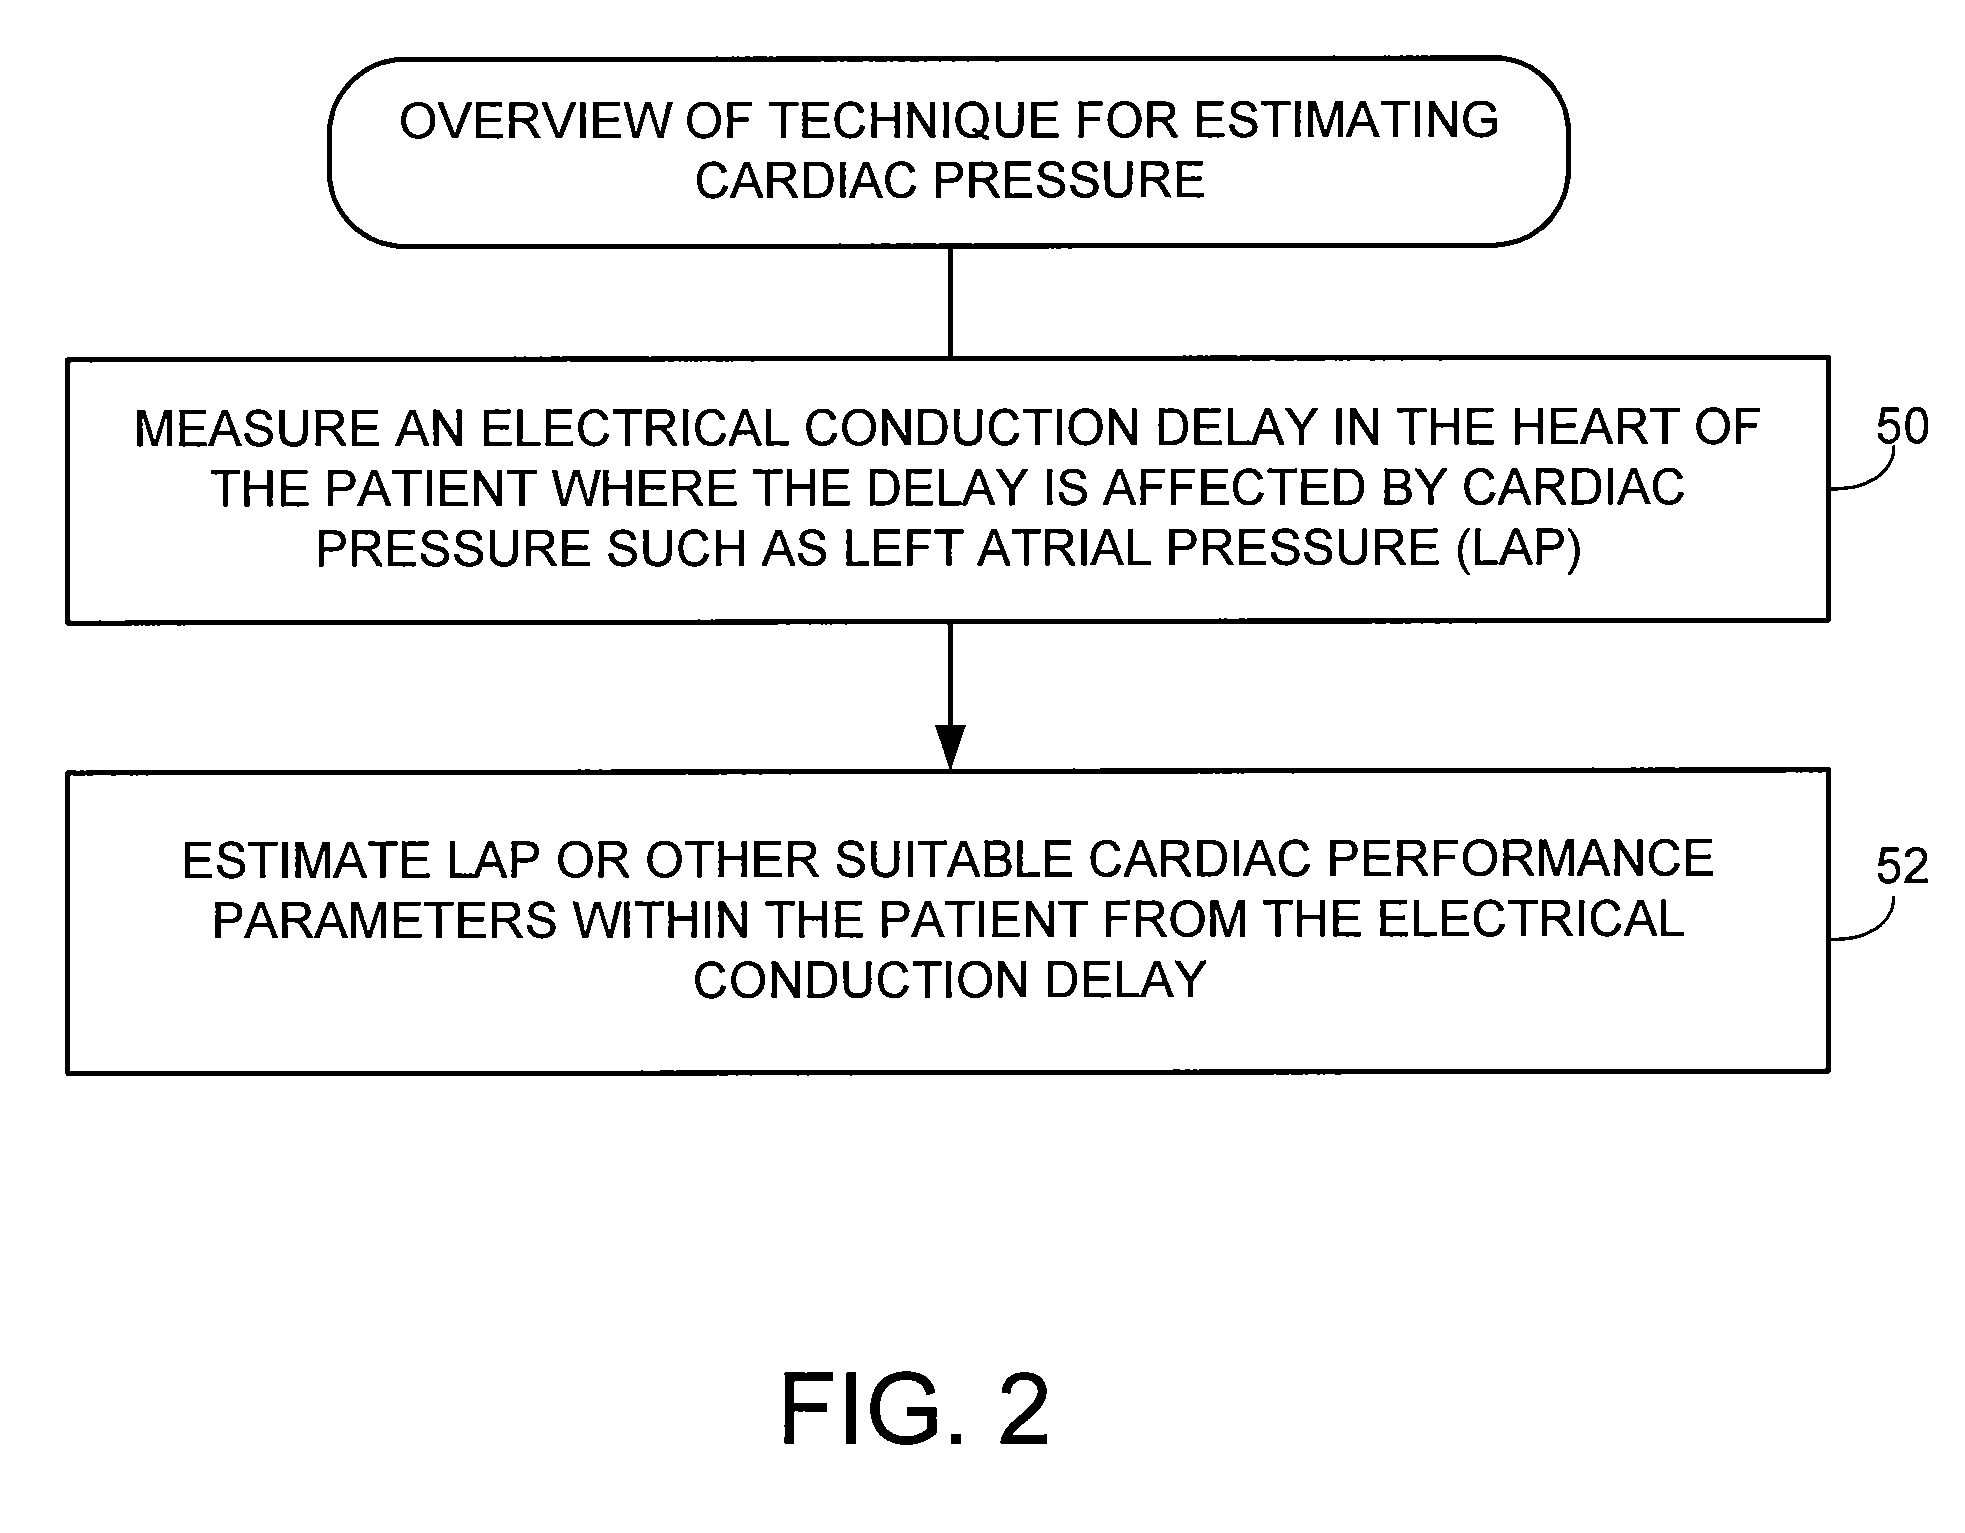 System and Method for Estimating Cardiac Pressure Based on Cardiac Electrical Conduction Delays Using an Implantable Medical Device